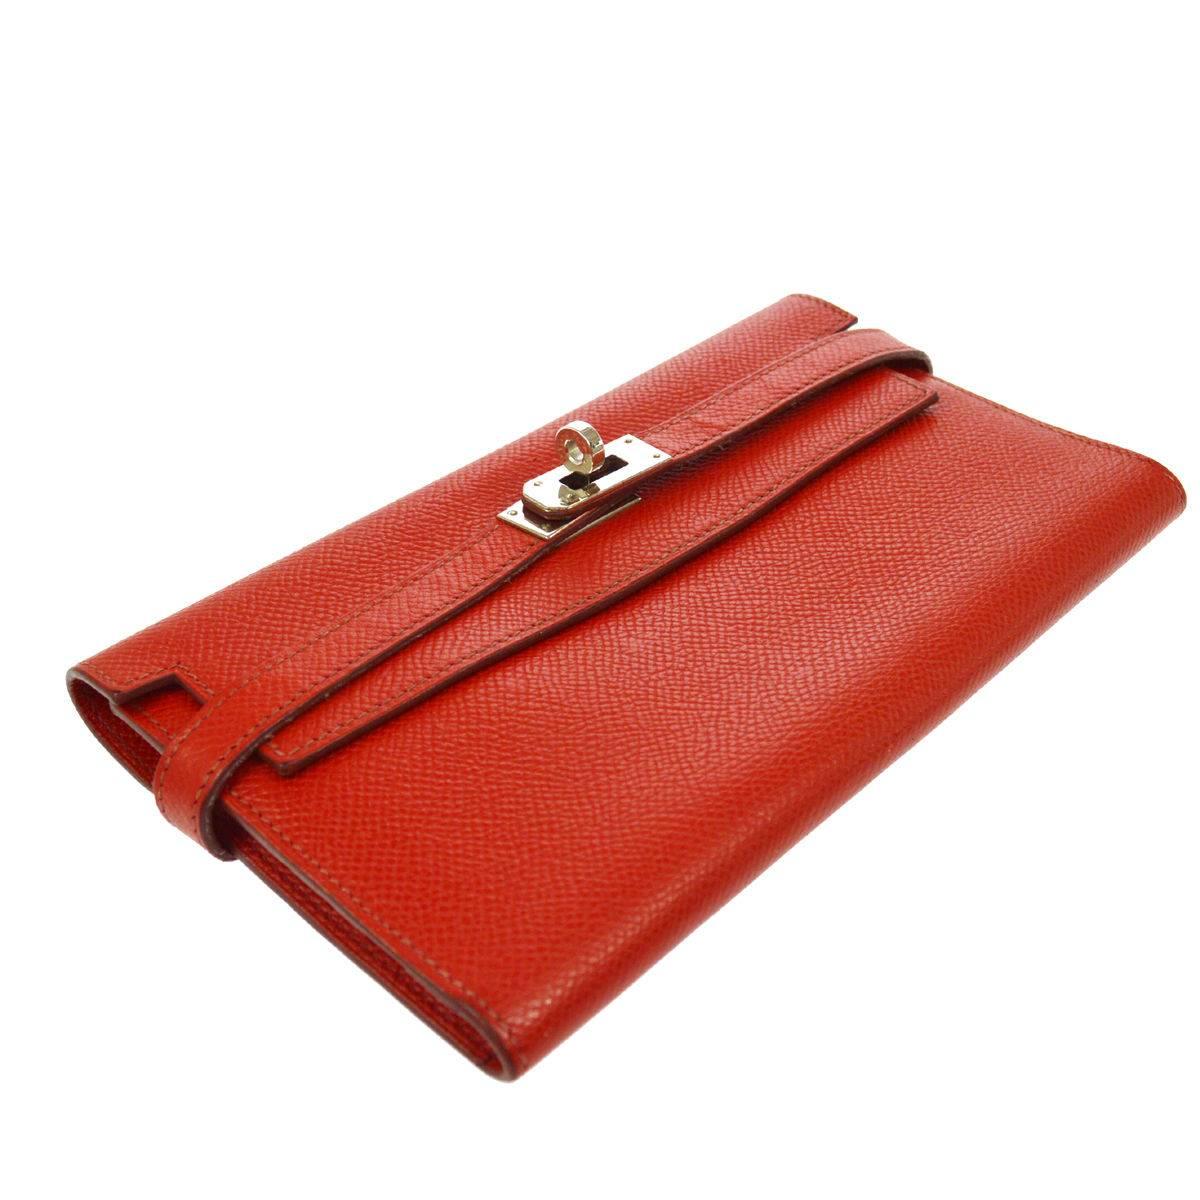 CURATOR'S NOTES

Hermes Leather Kelly Clutch Wallet  

Epson leather
Palladium hardware
Turnlock closure
Made in France
Measures 7.5" W x 4" H 

Shop Newfound Luxury for authentic Hermes Kelly wallets and bags.